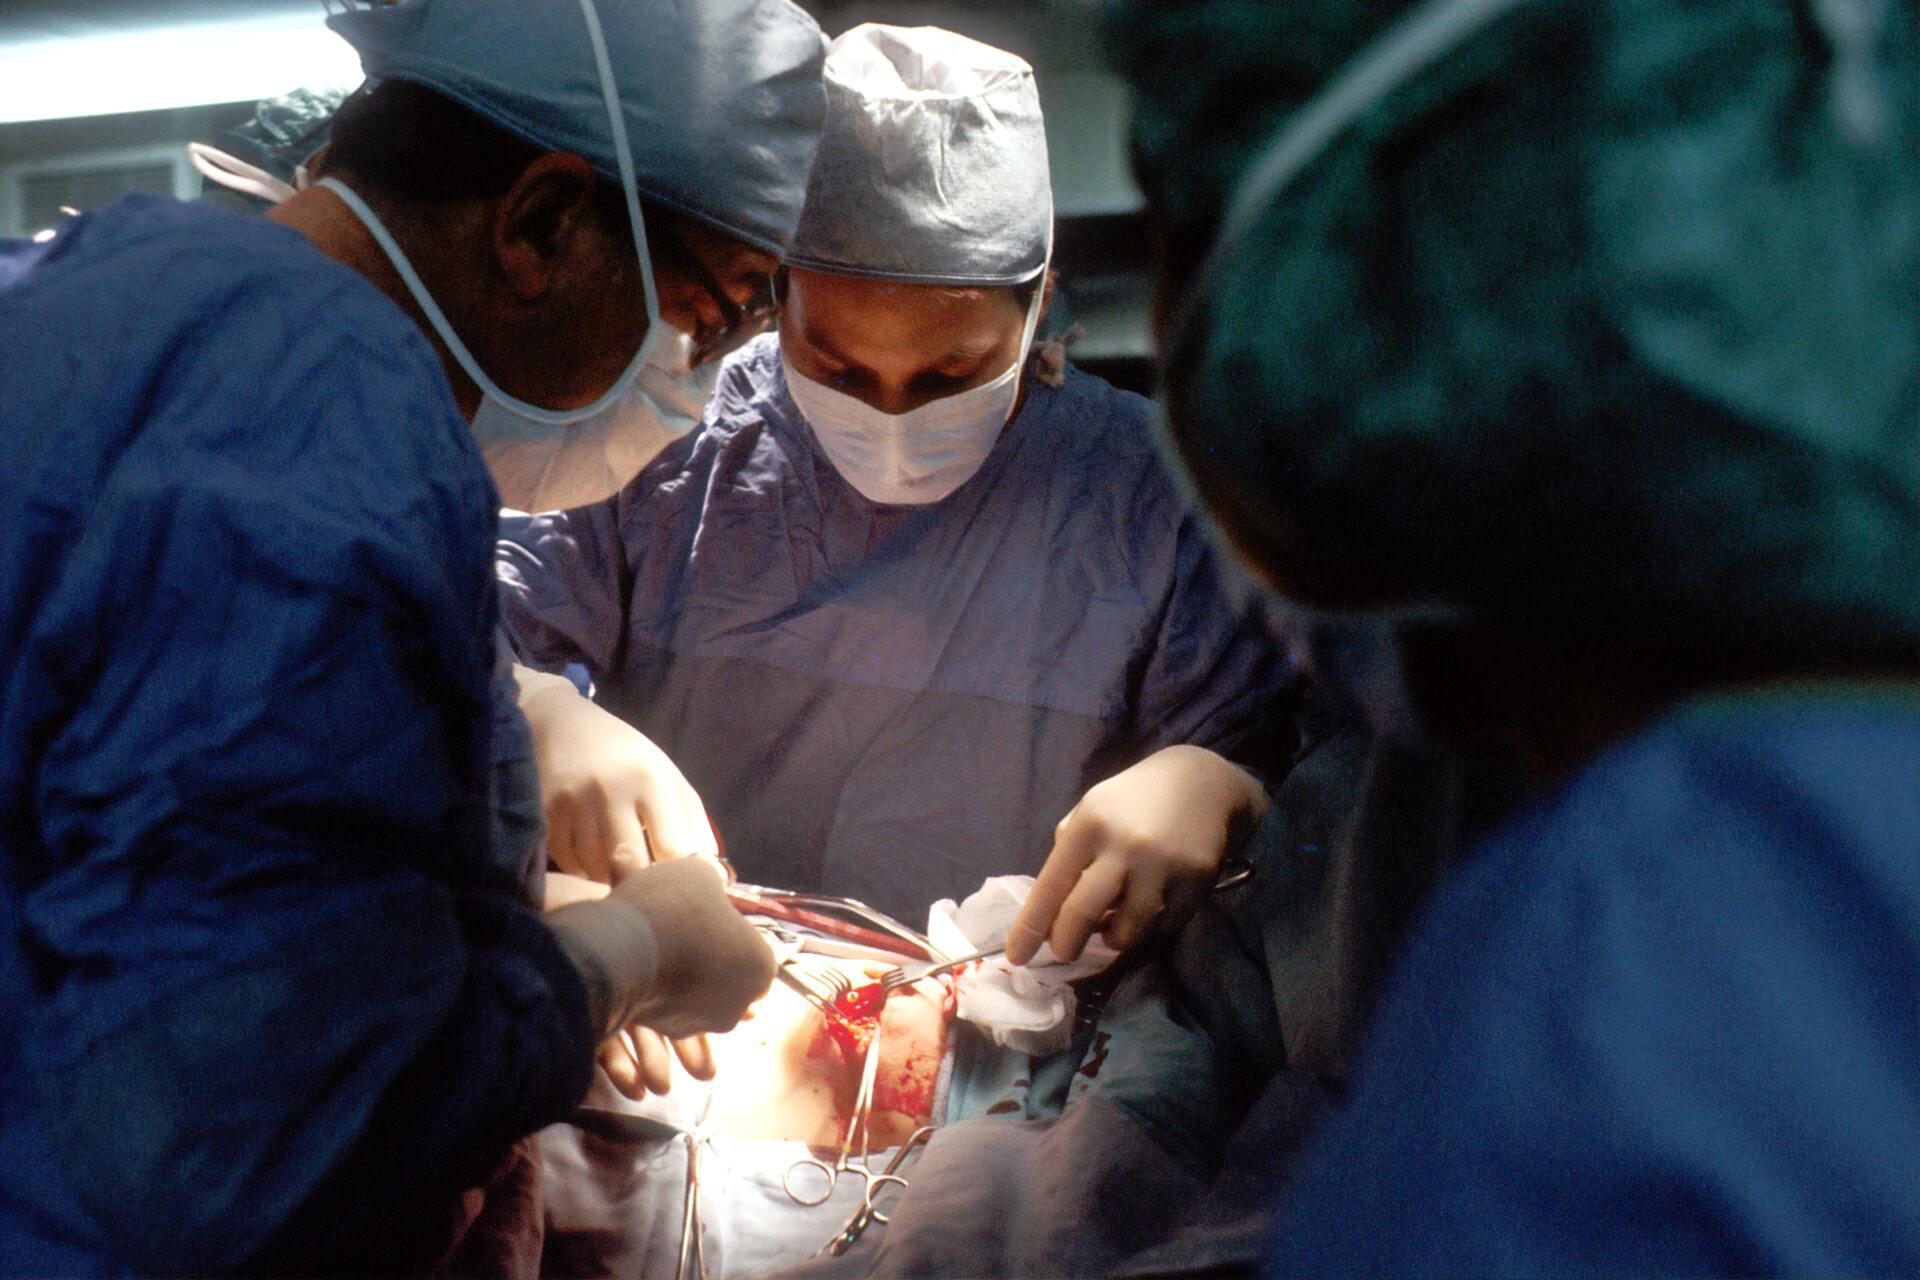 doctors performing a surgery